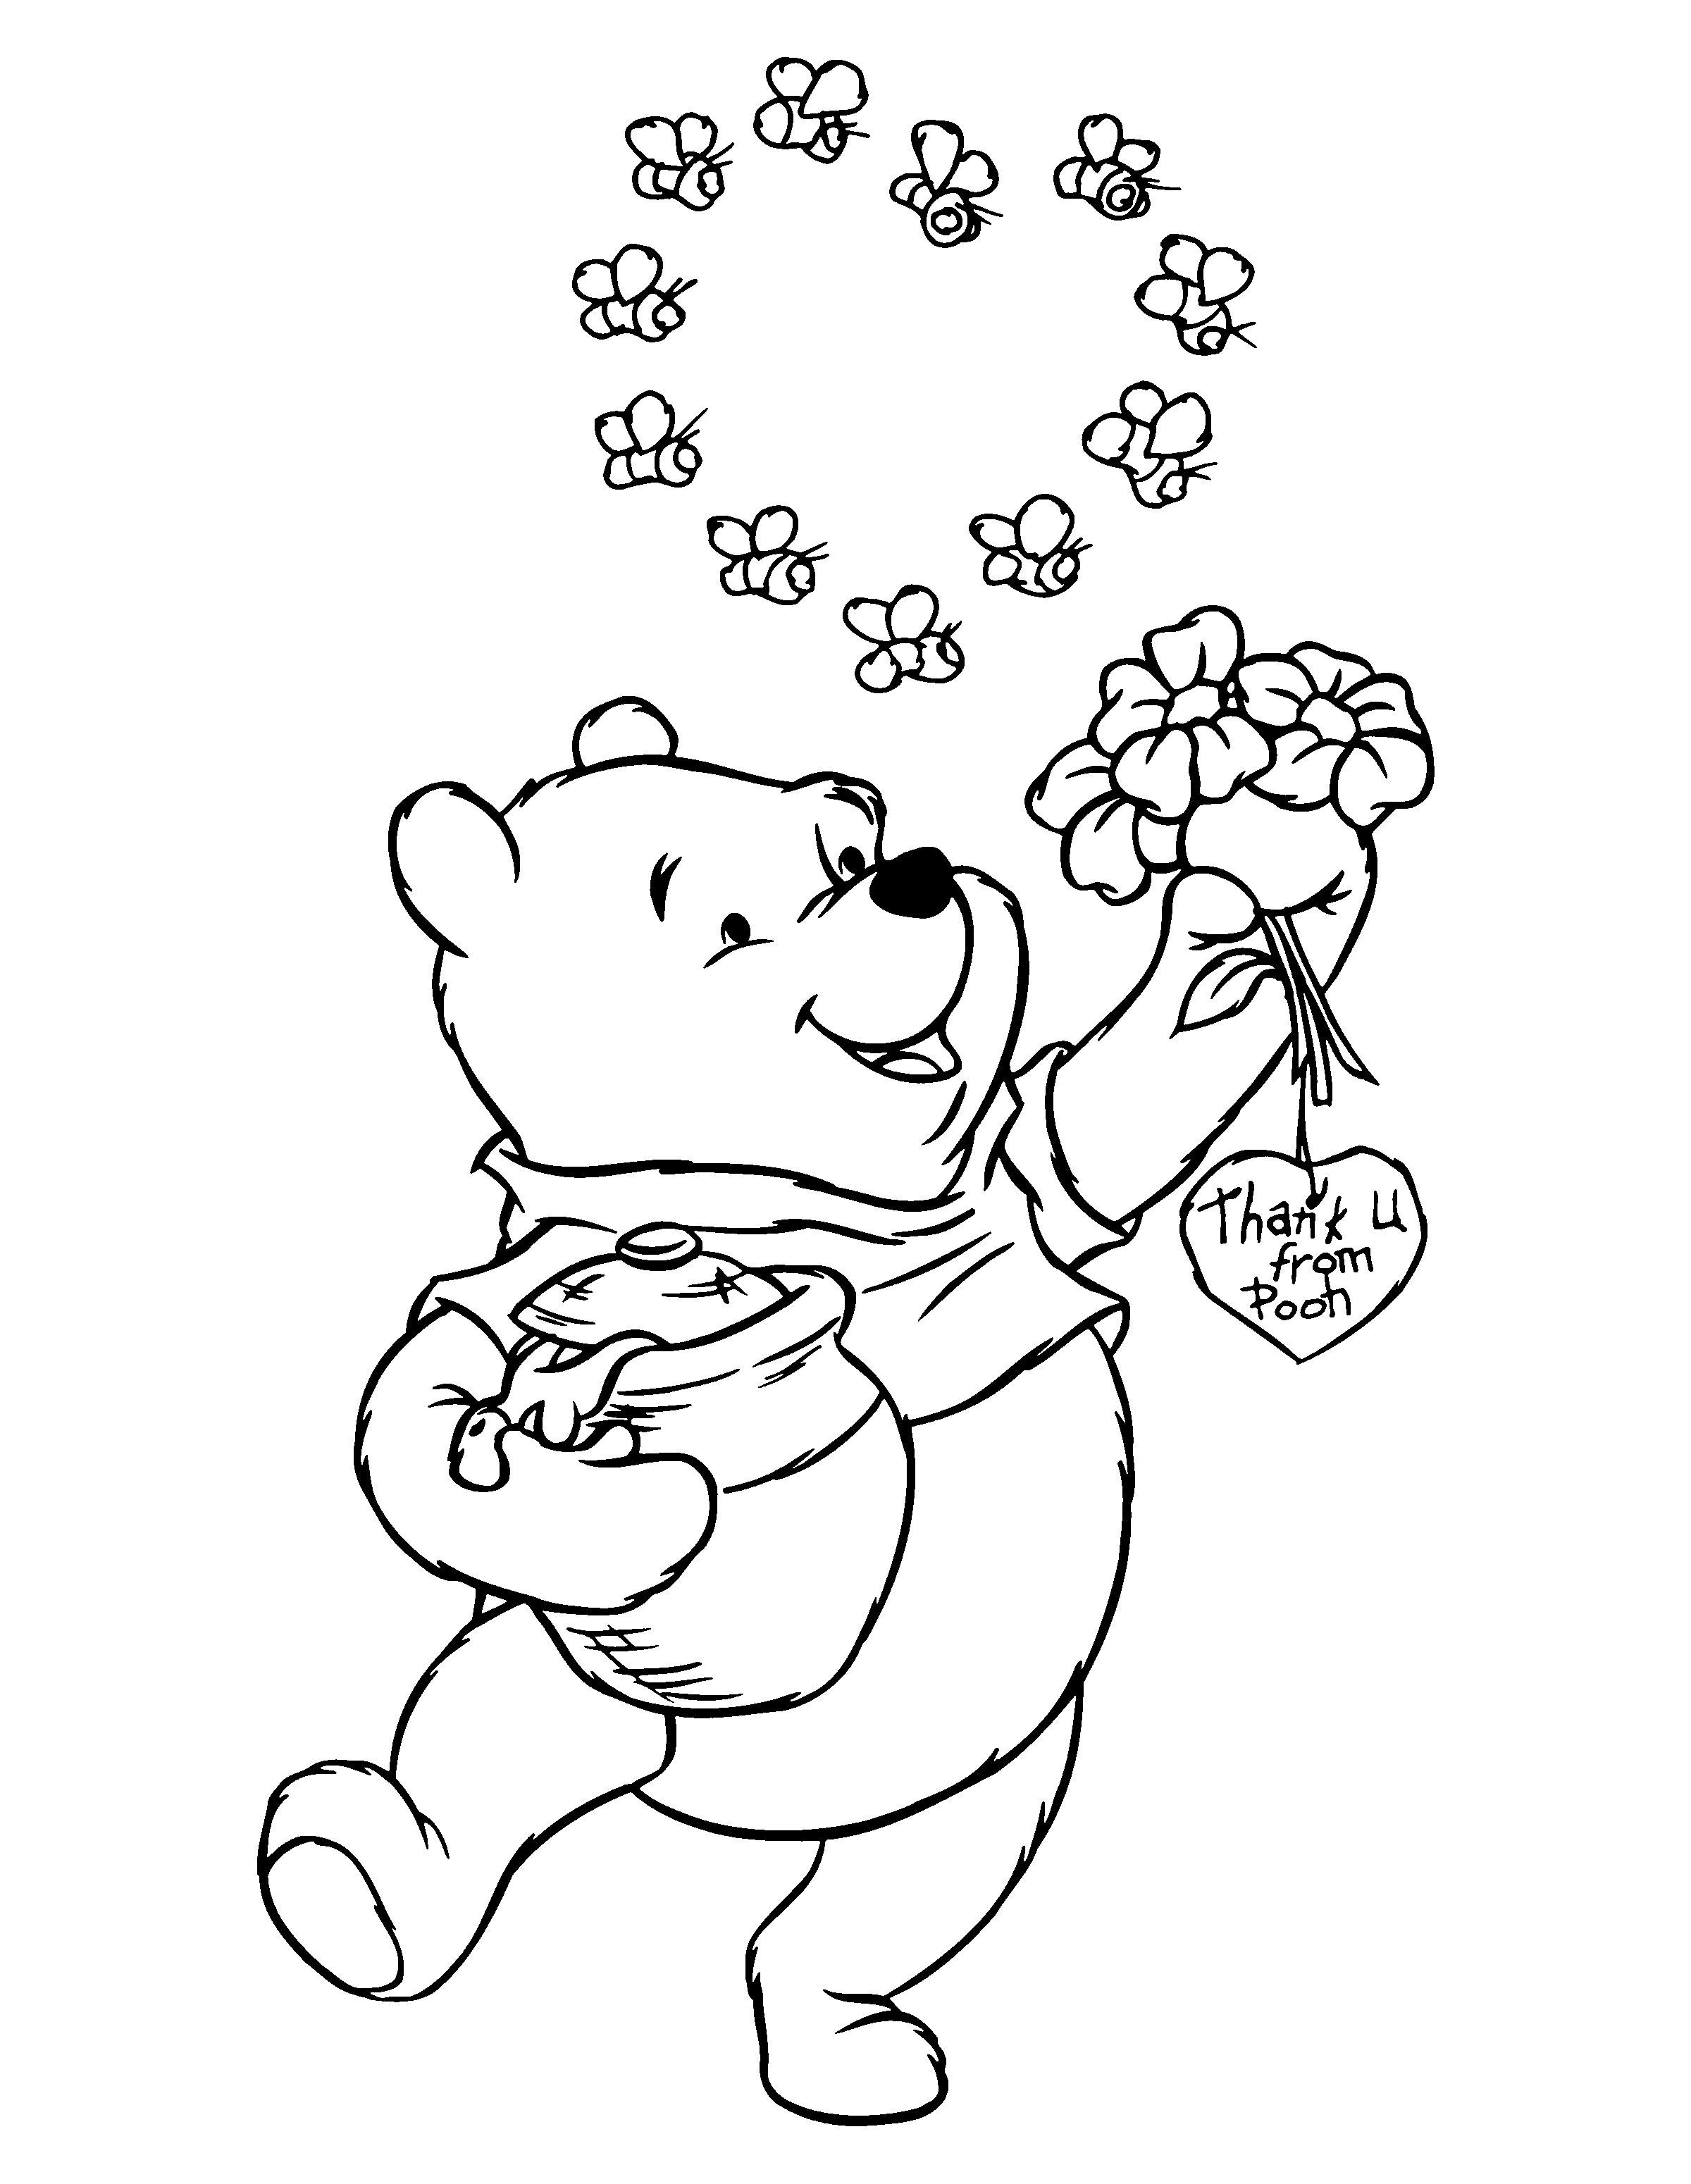 animated-coloring-pages-winnie-the-pooh-image-0058